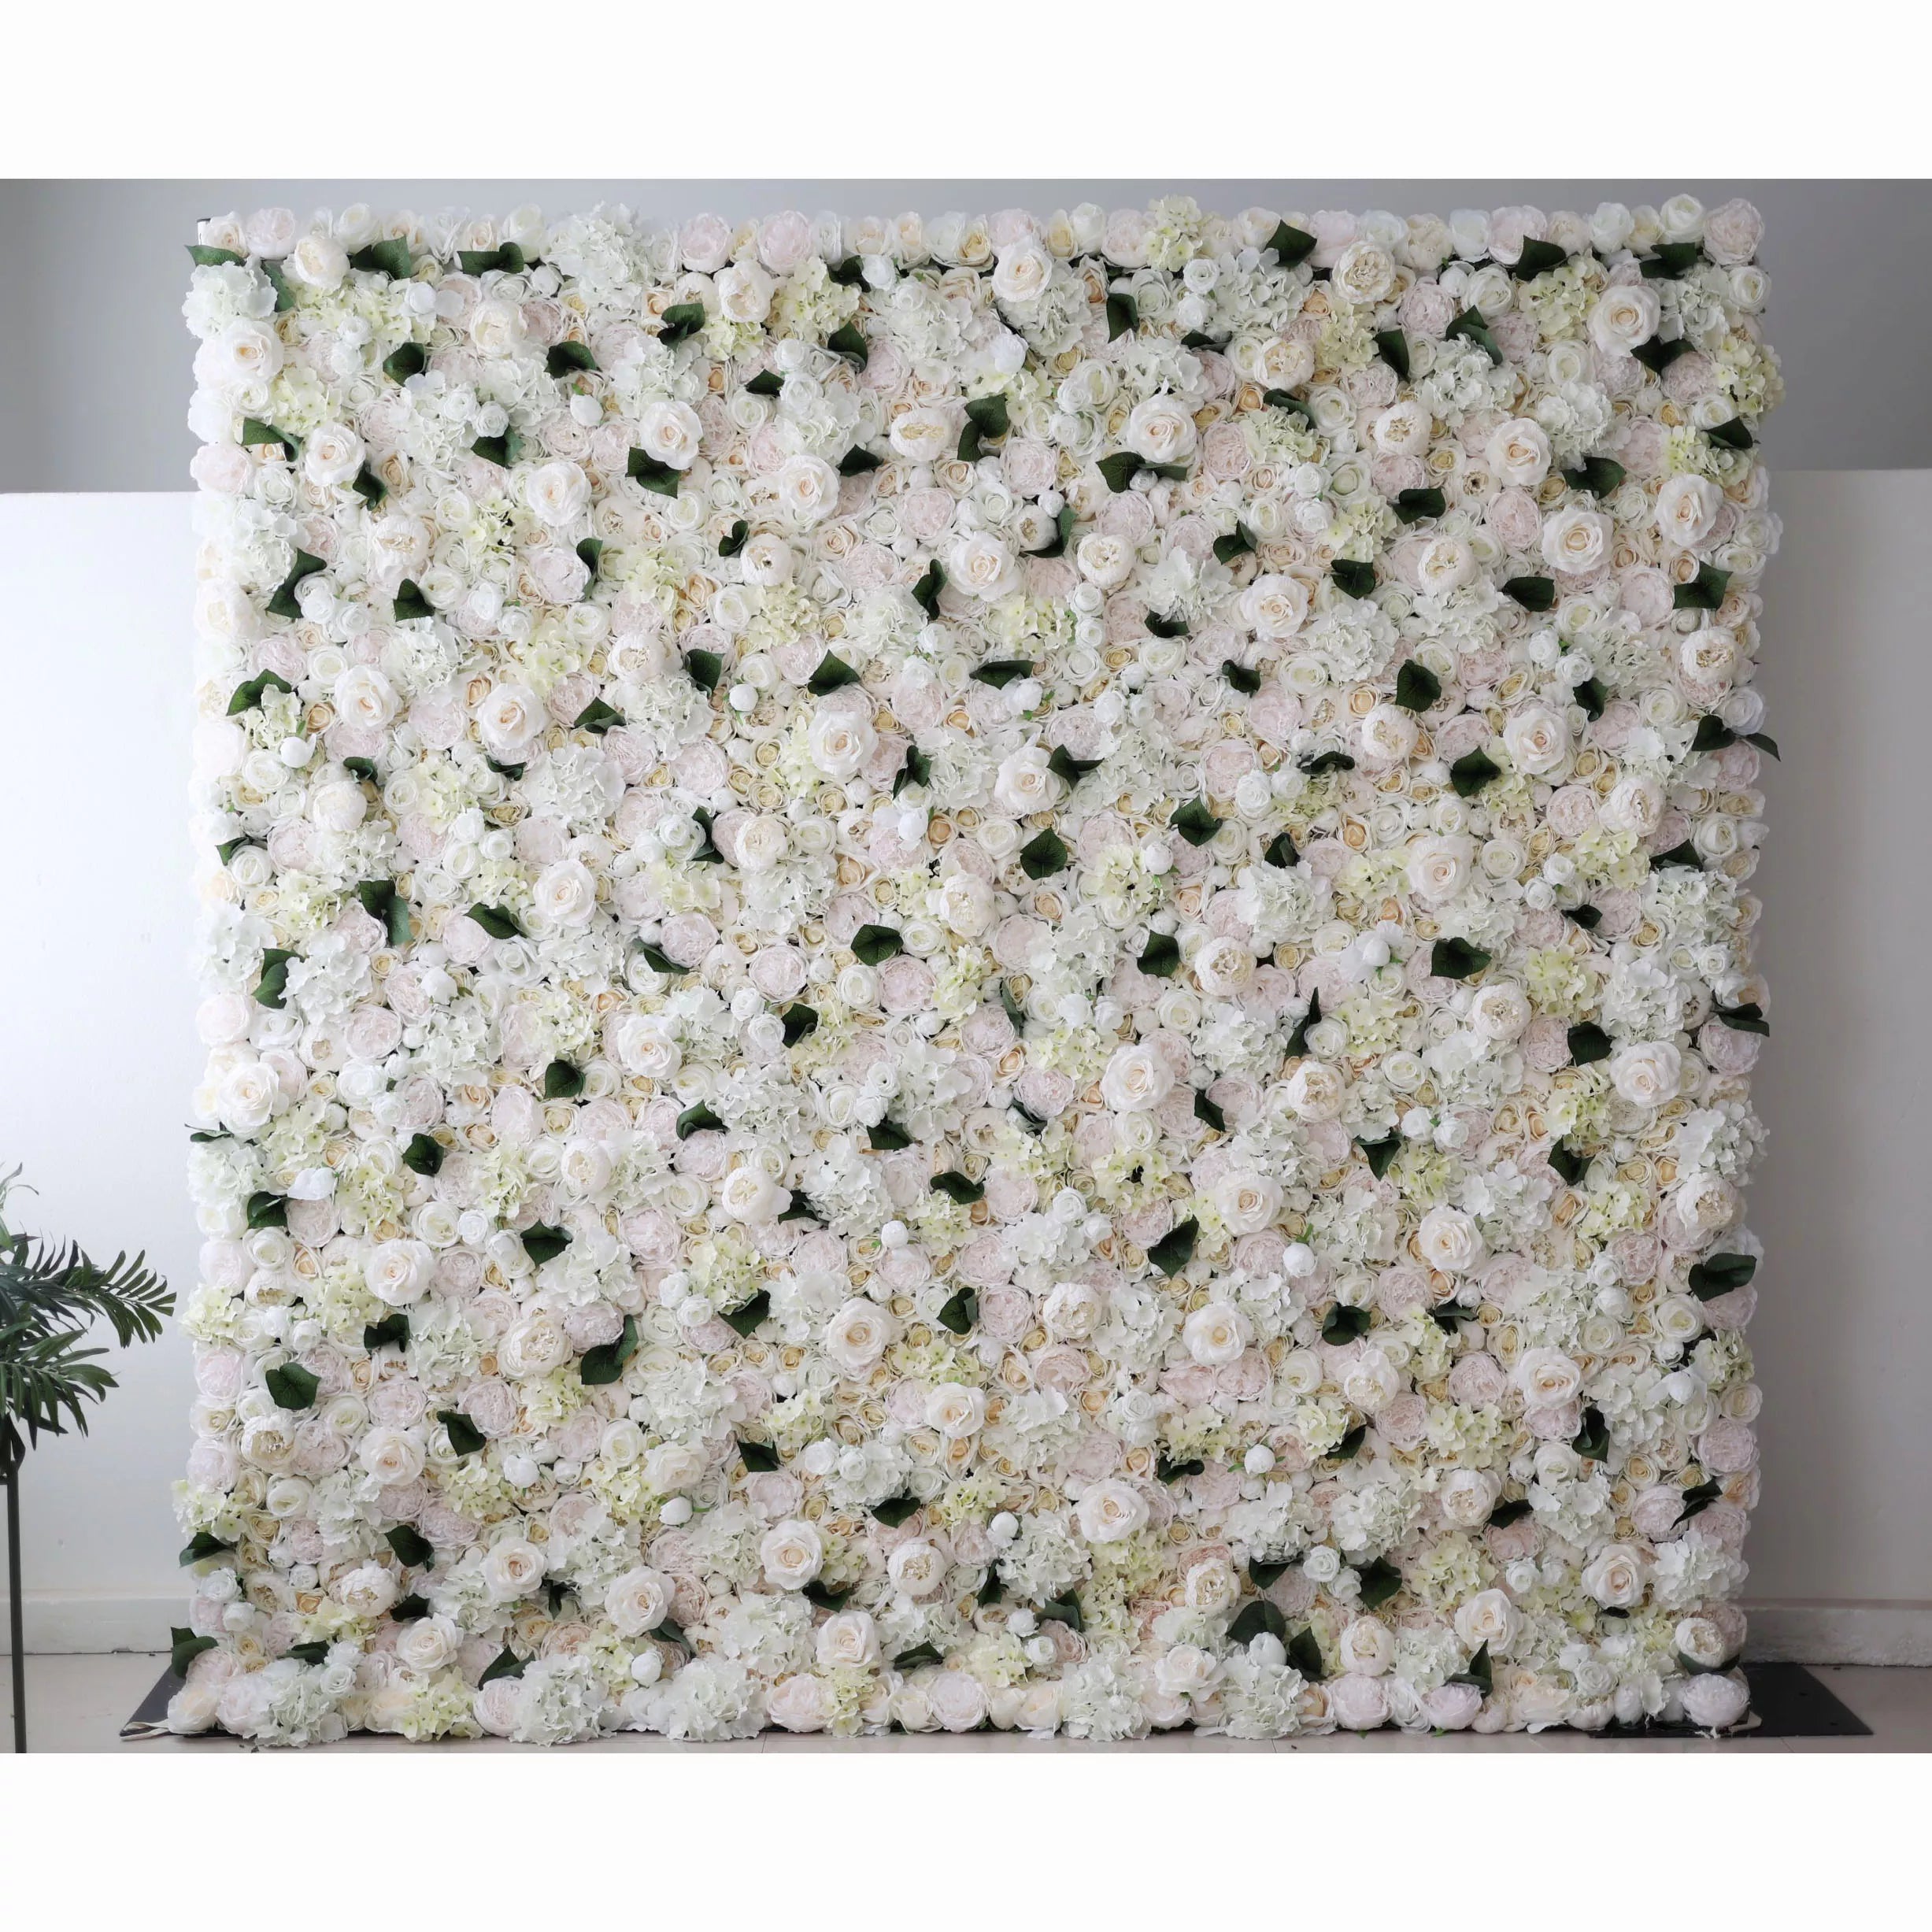 Valar Flowers Showcases: Ivory Elegance – A Majestic Symphony of Roses in an Artificial Fabric Flower Wall-VF-212